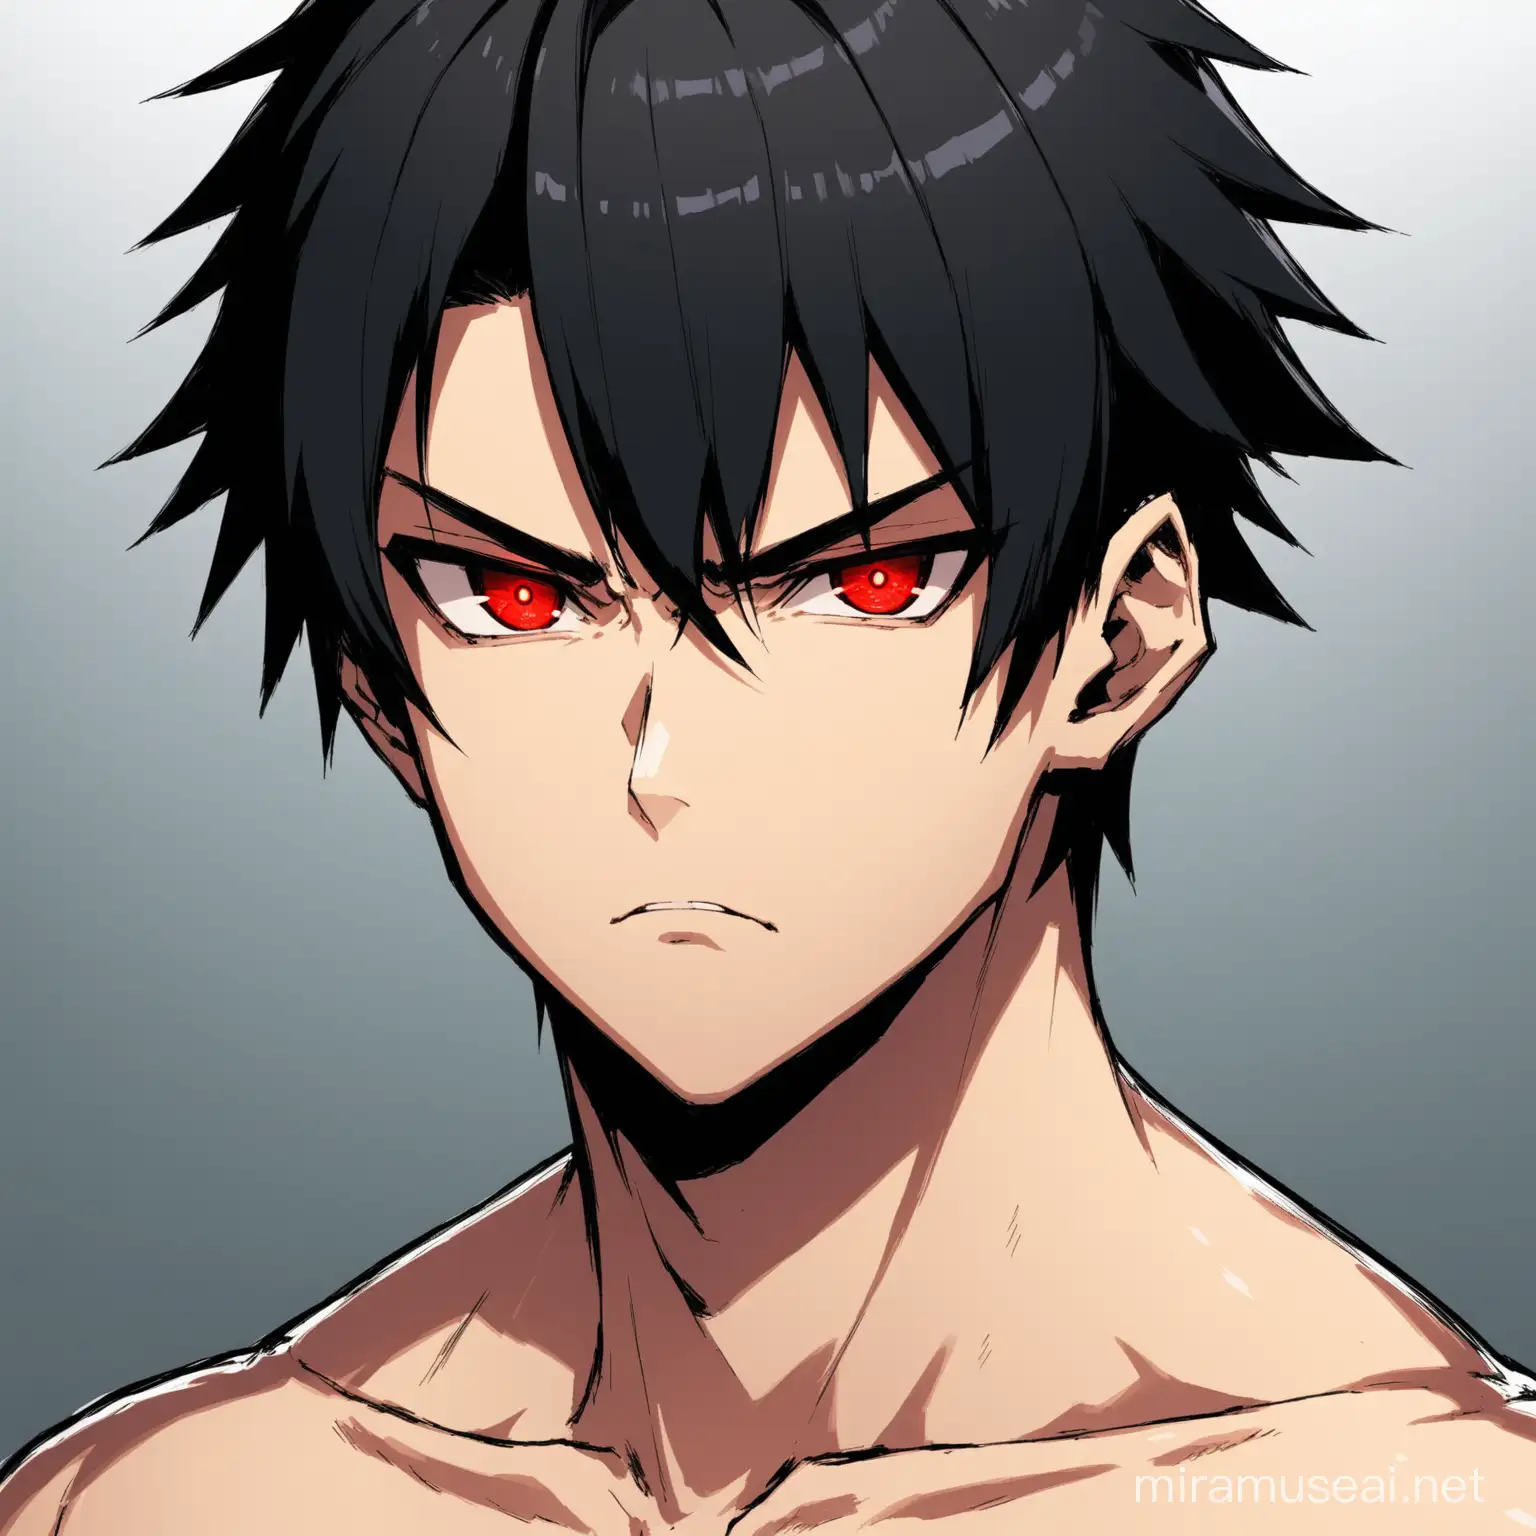 ShIRTLESS ROBOTIC BOY WITH SERIOUS EXPRESSION AND RED EYES